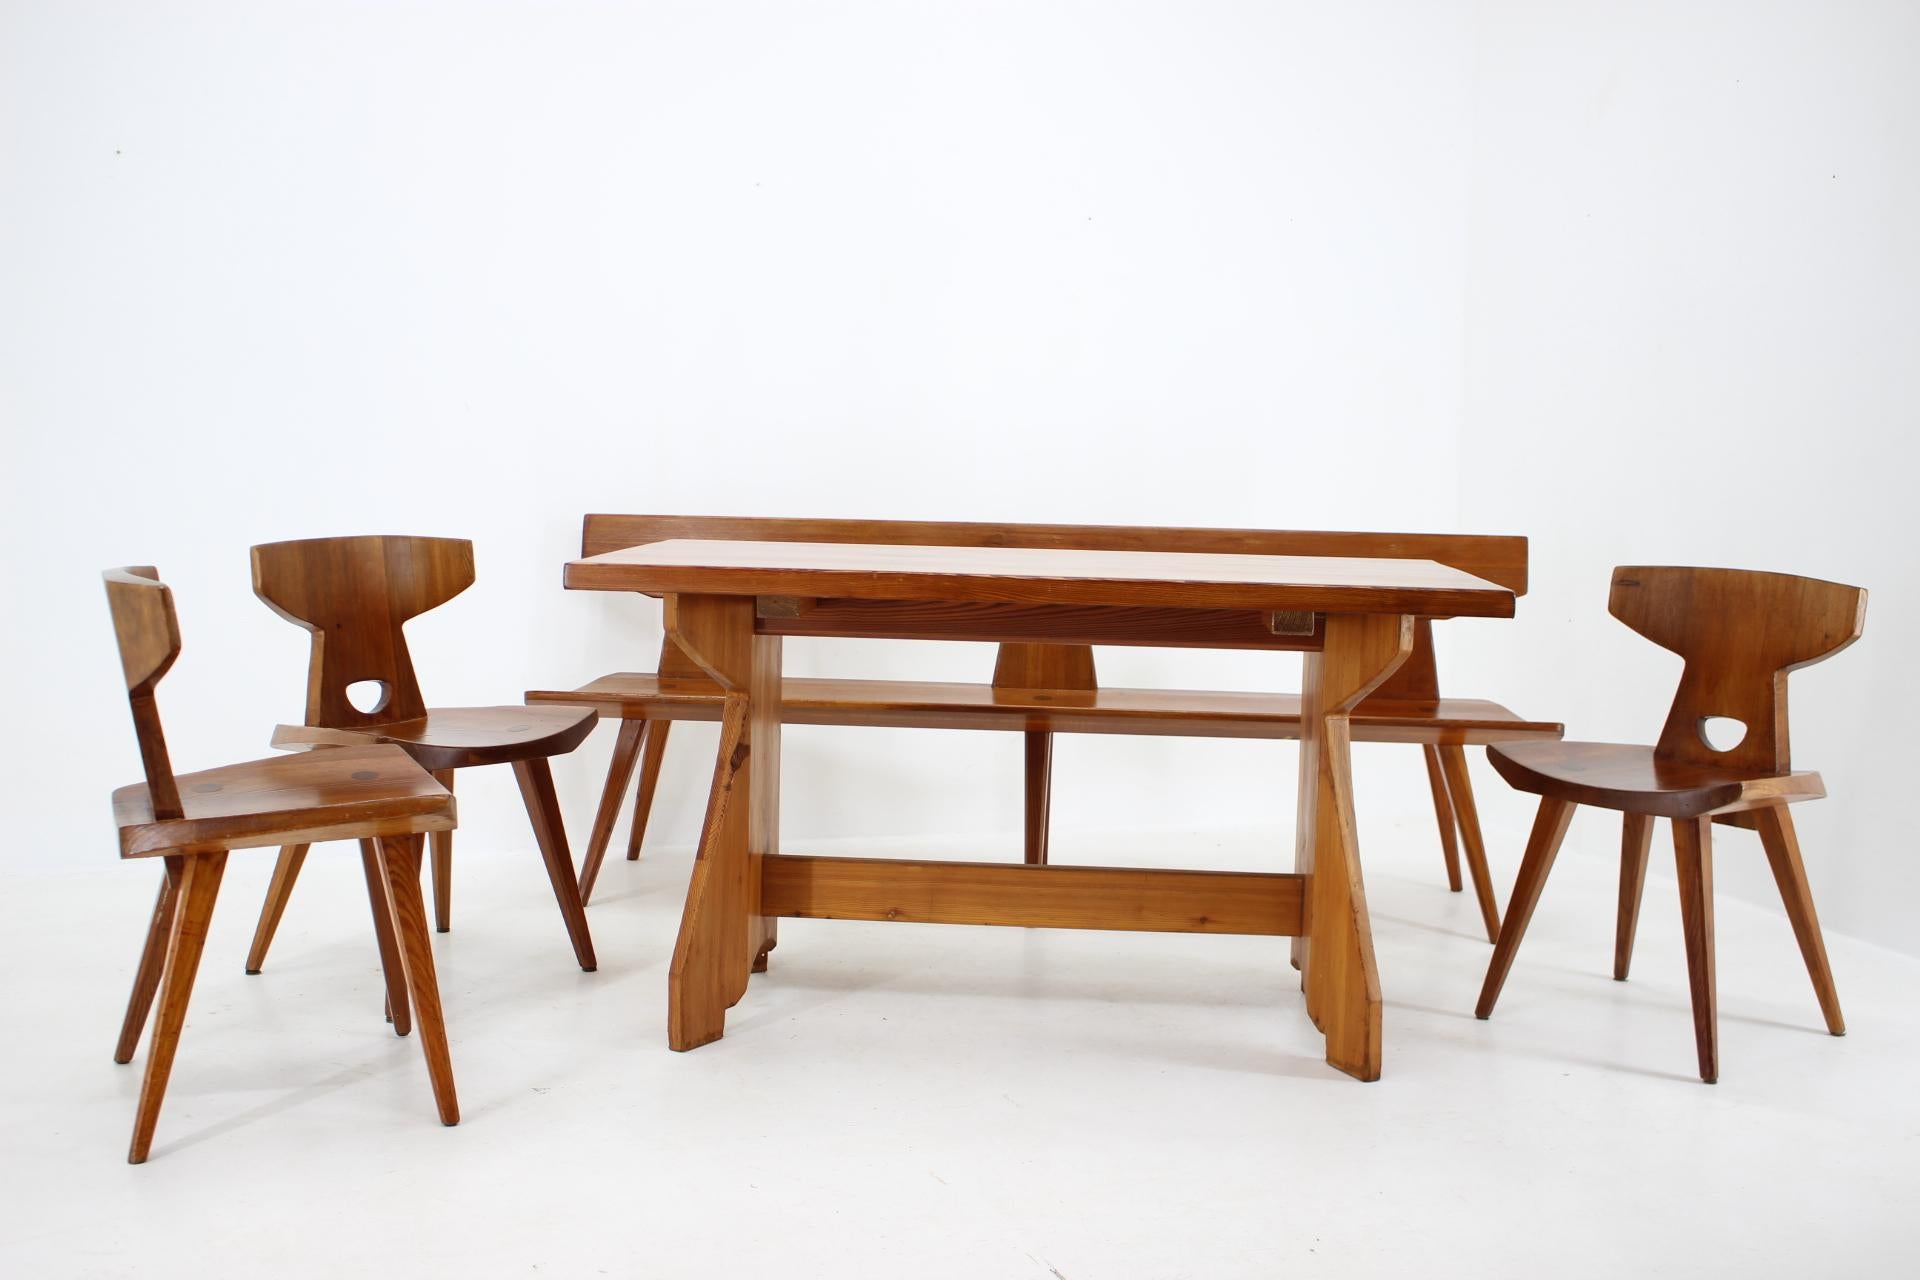 - The designer won the Cabinetmaker Guild price in Denmark 1960. 
- Super hand crafted chairs and table in solid pine wood. 
- Good original condition with some signs of use 
- The bench dimensions : Height :76cm Seat height : 44cm Width 200cm